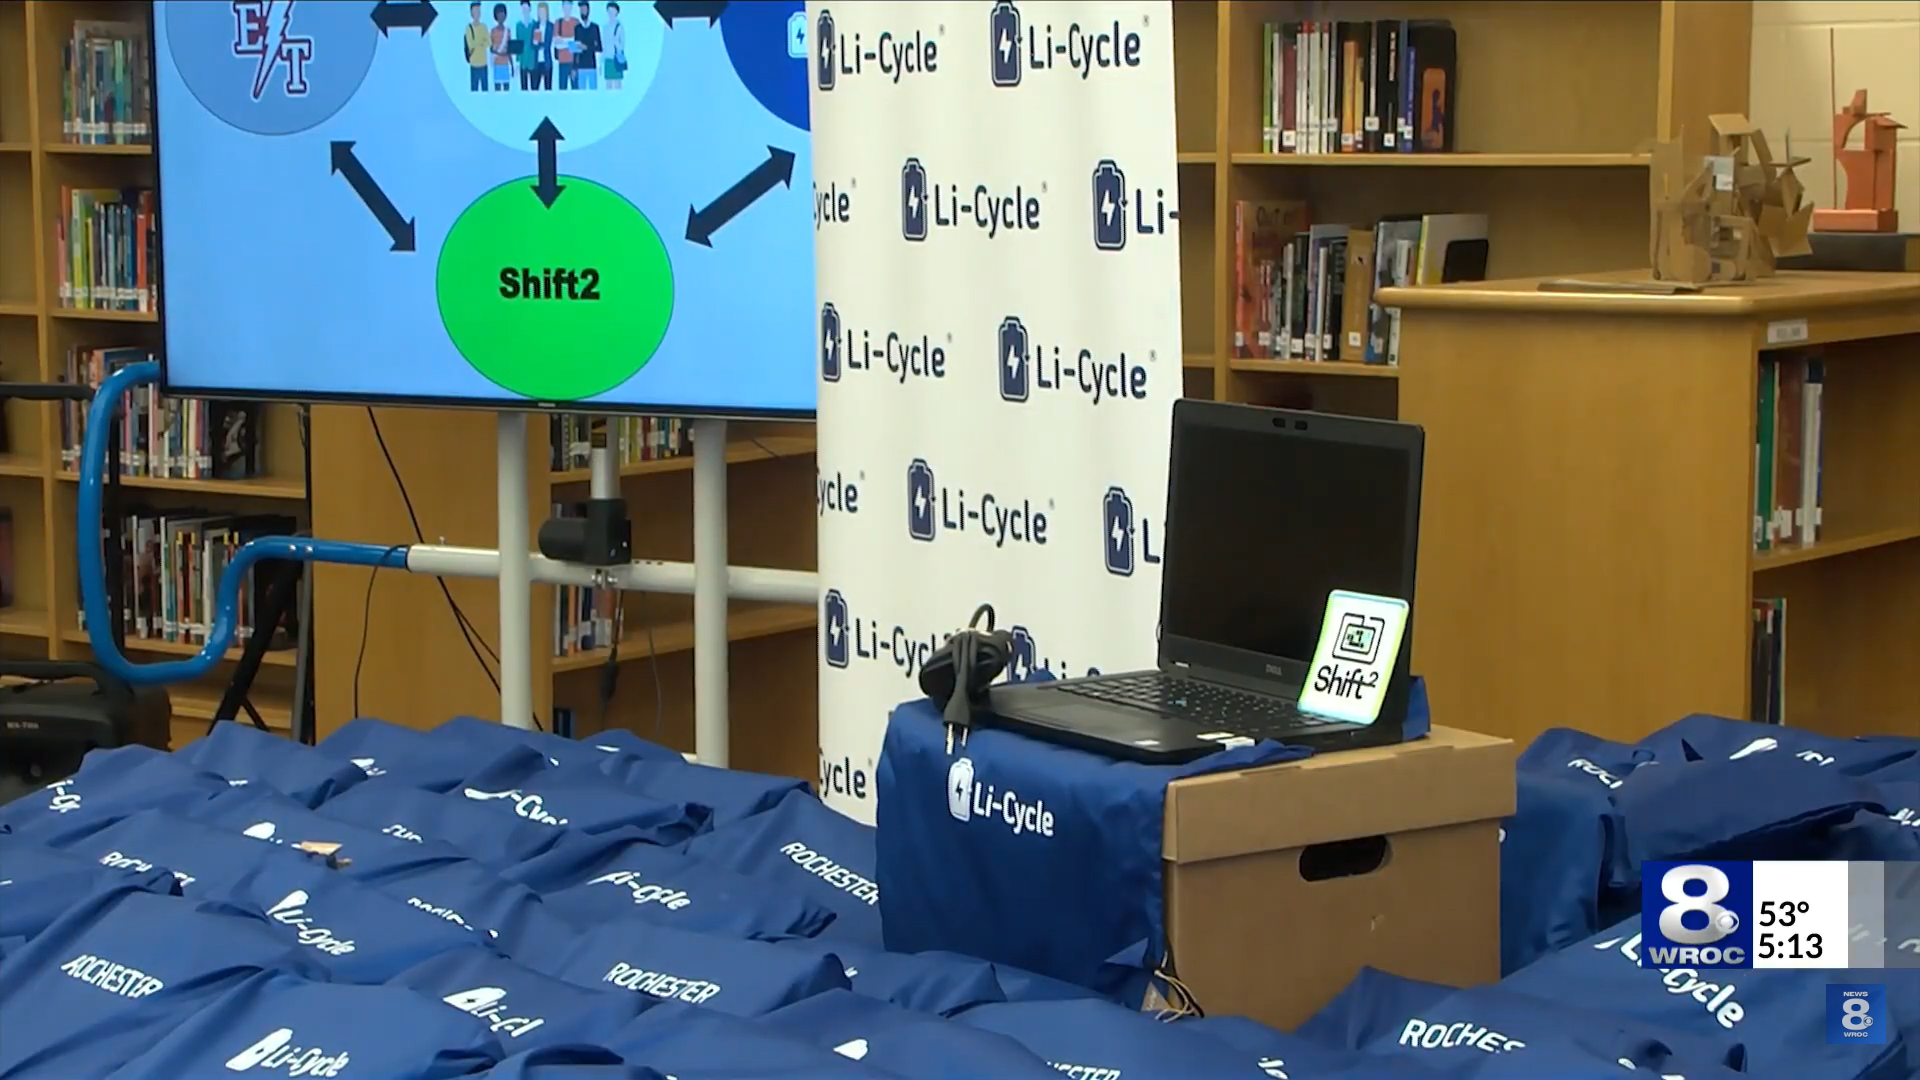 Screencapture from WROC news segment about Li-Cycle's donation of laptops to Edison Tech Highschool students. Photo shows a laptop with blue Li-Cycle branded tote bags.